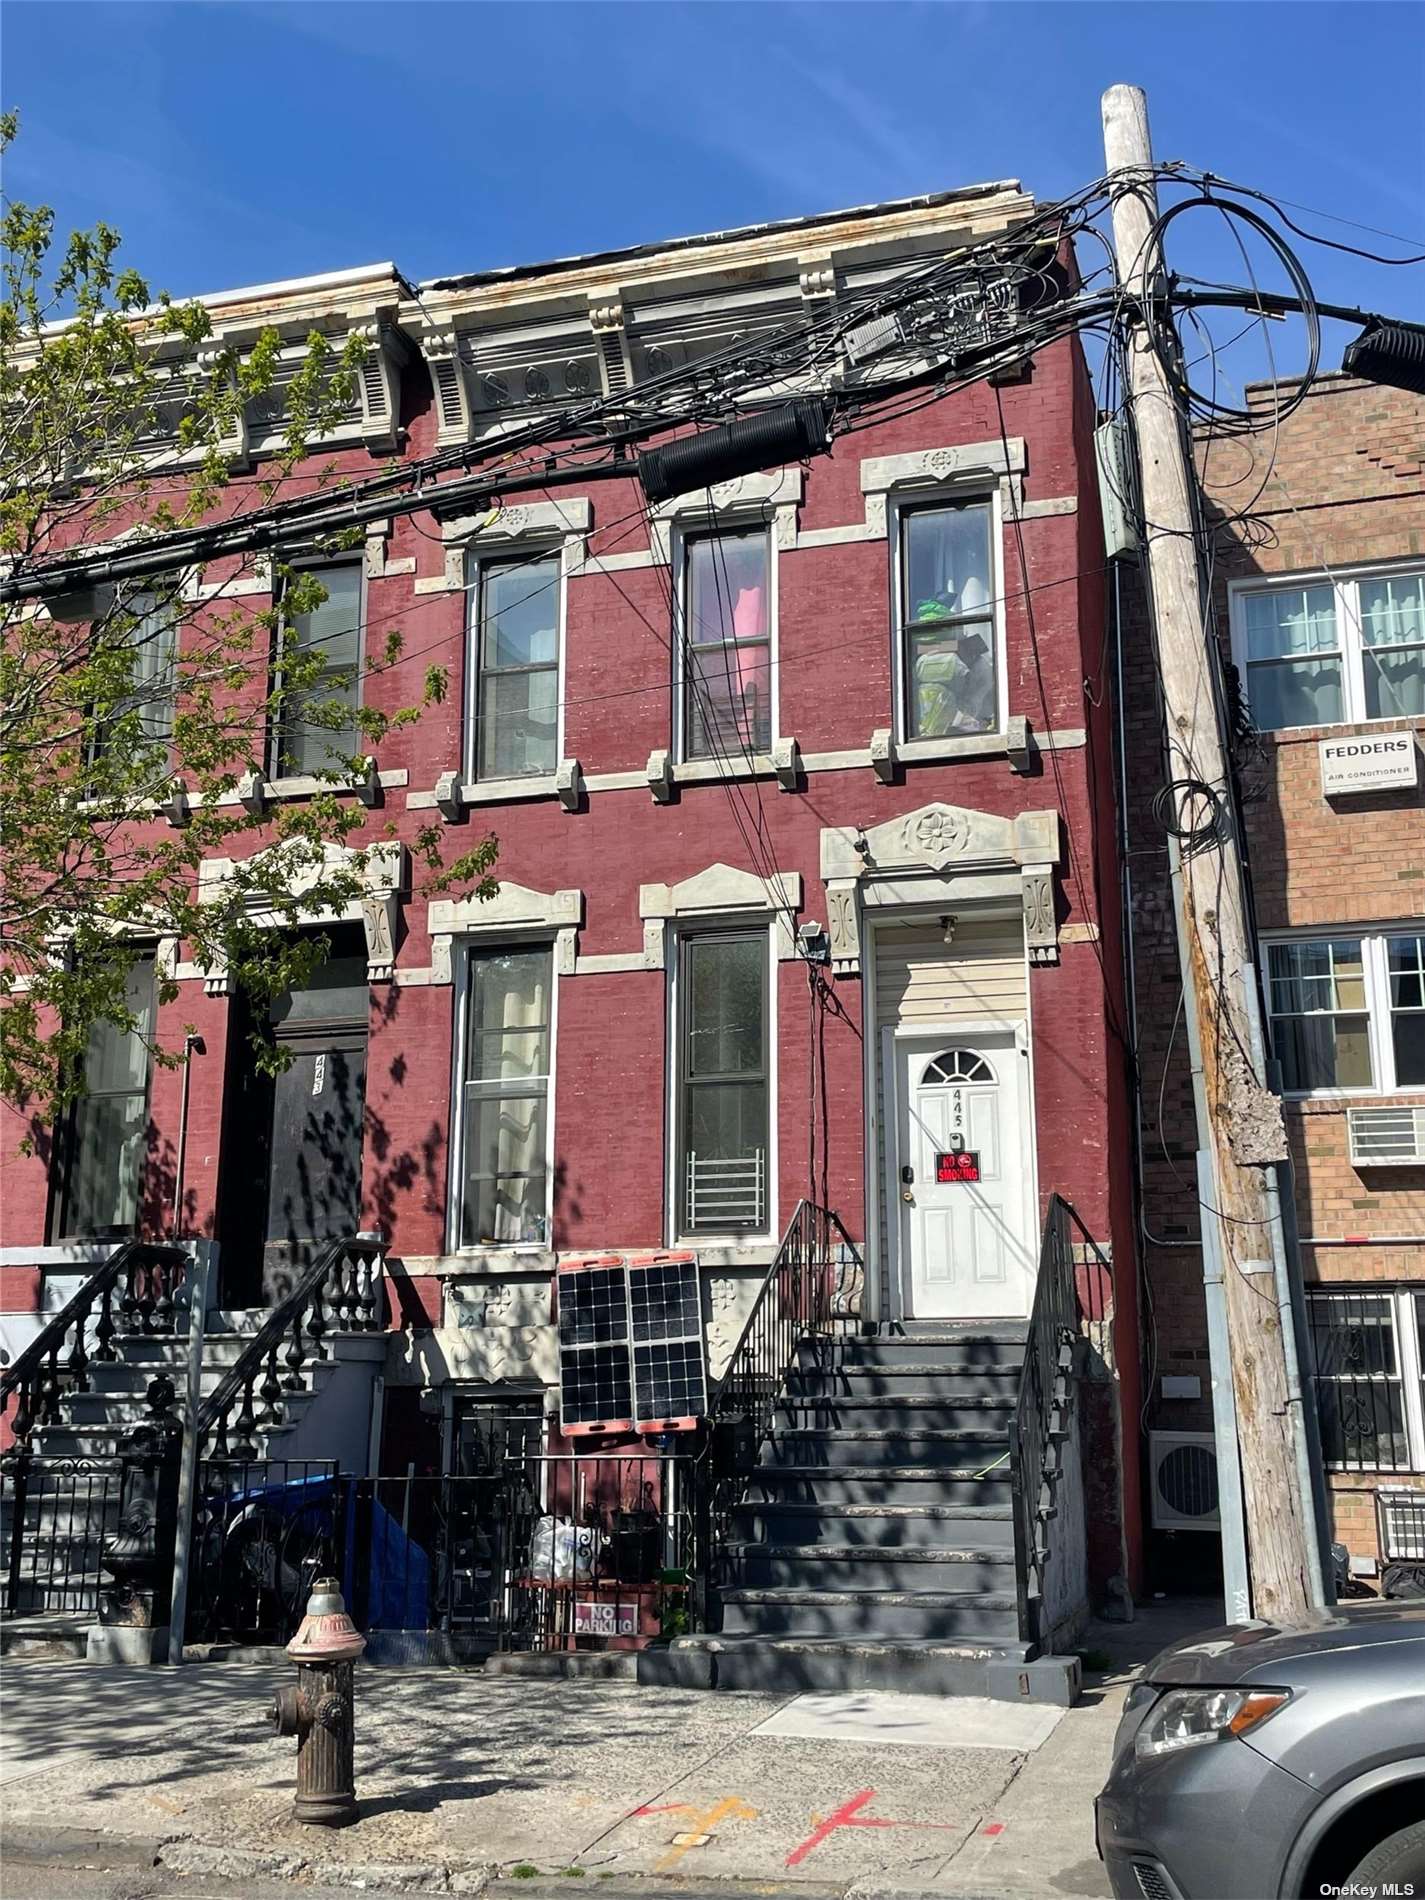 Property for Sale at 445 E 139th Street, Bronx, New York - Bedrooms: 6 
Bathrooms: 2 
Rooms: 13  - $997,000